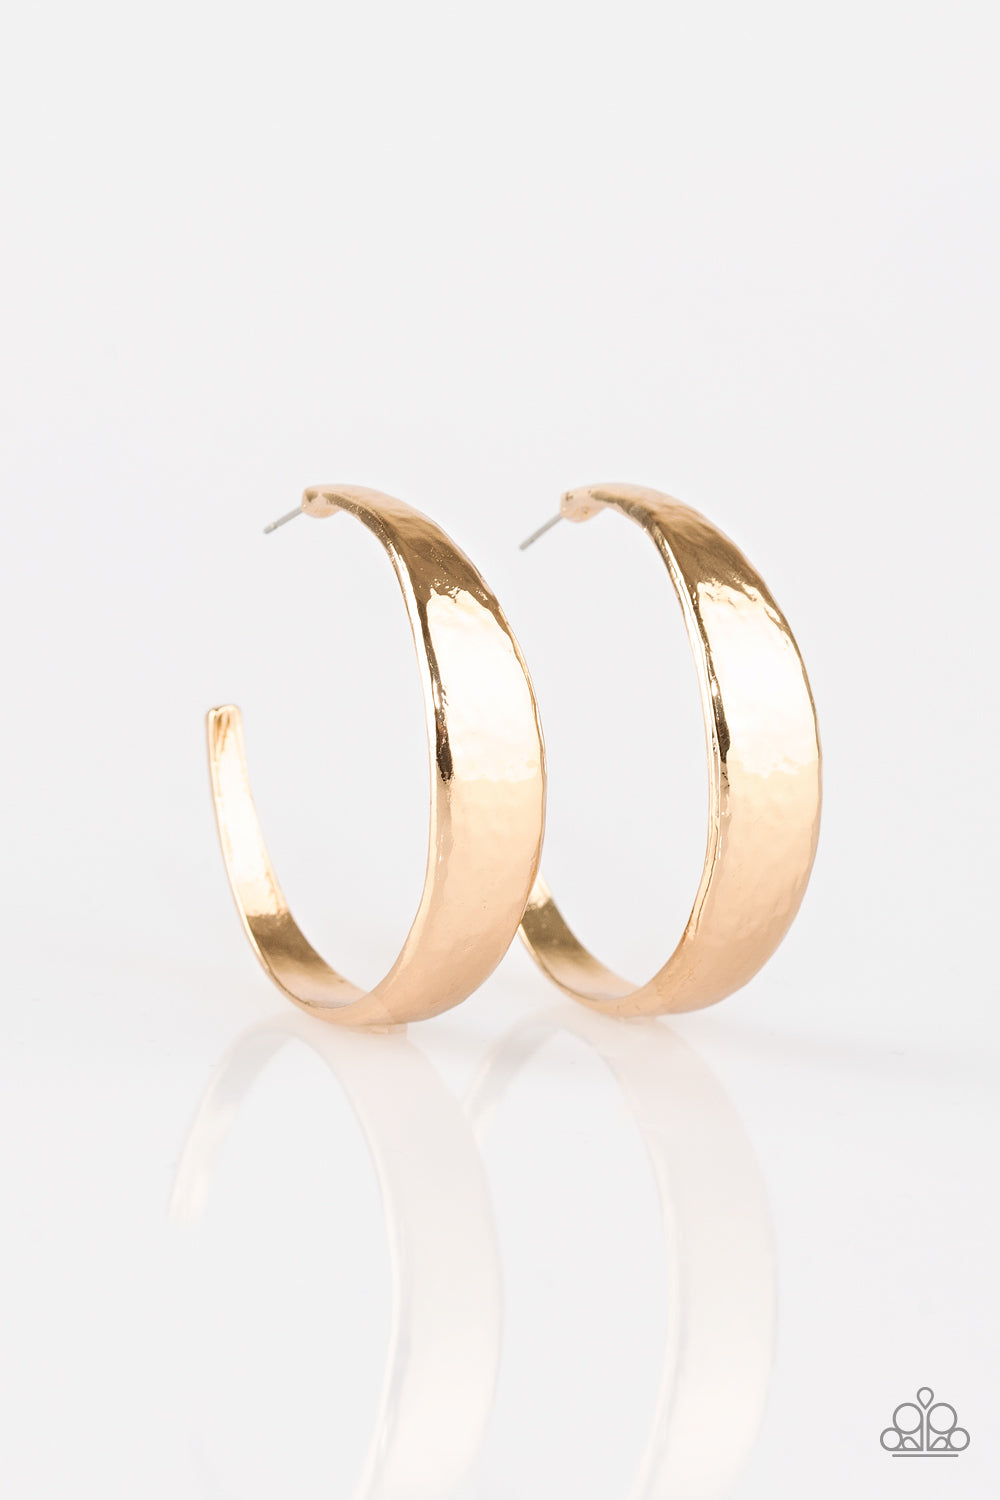 Paparazzi Accessories HOOP and Holler - Gold Earrings - Lady T Accessories